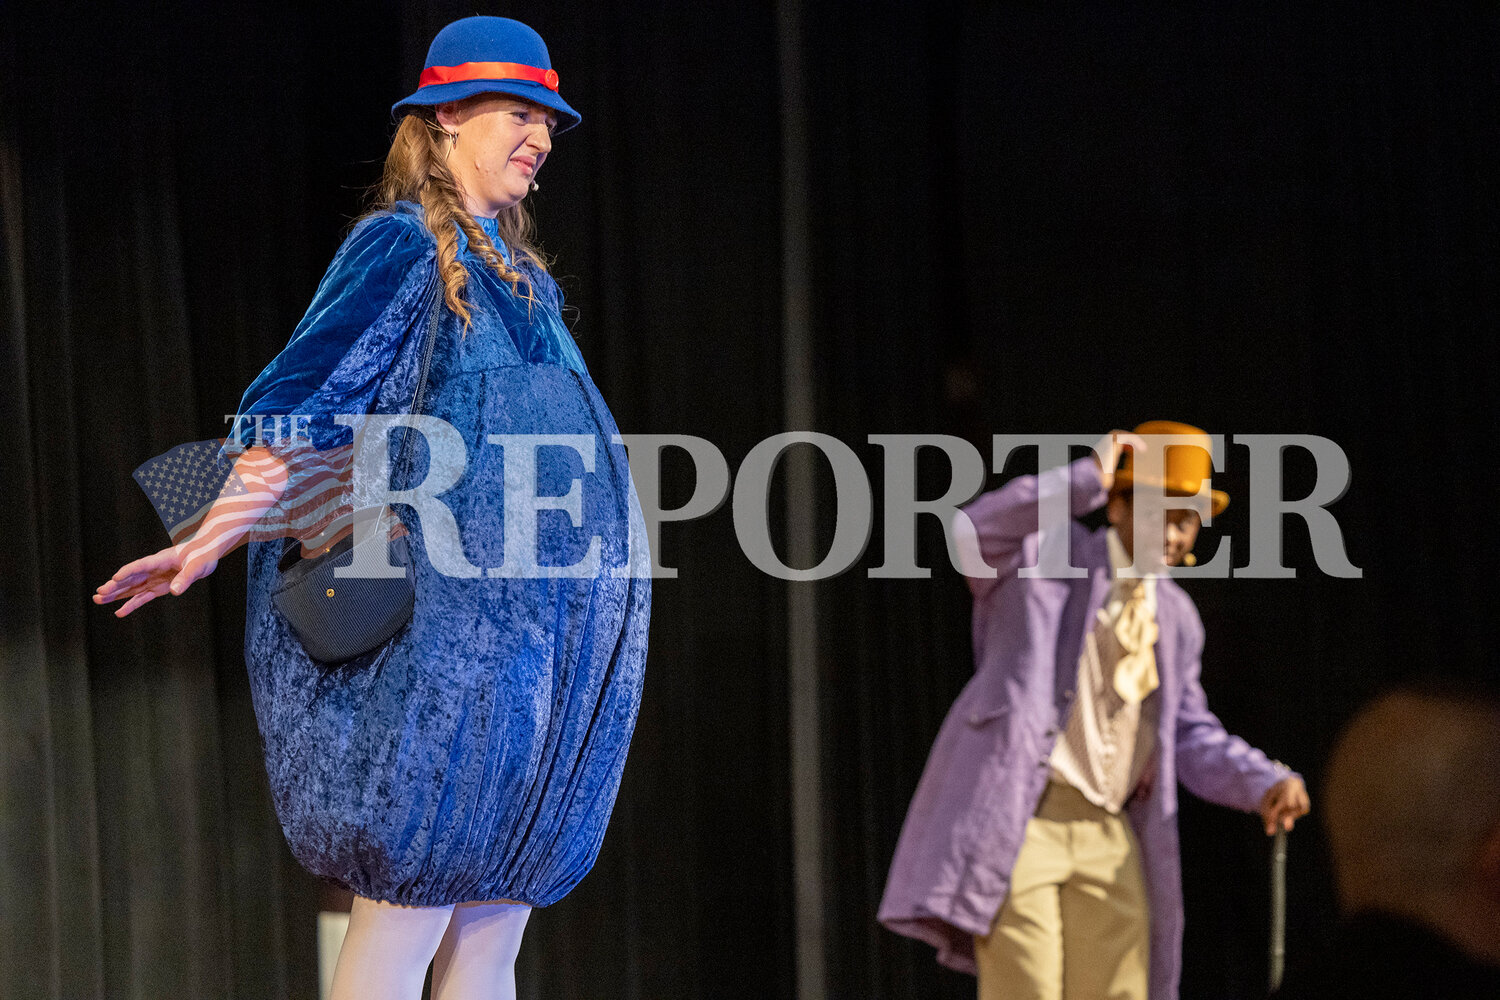 Violet Beauregarde played by Caroline Gorance blows up after eating defective gum during Willy Wonka Saturday, March 23.